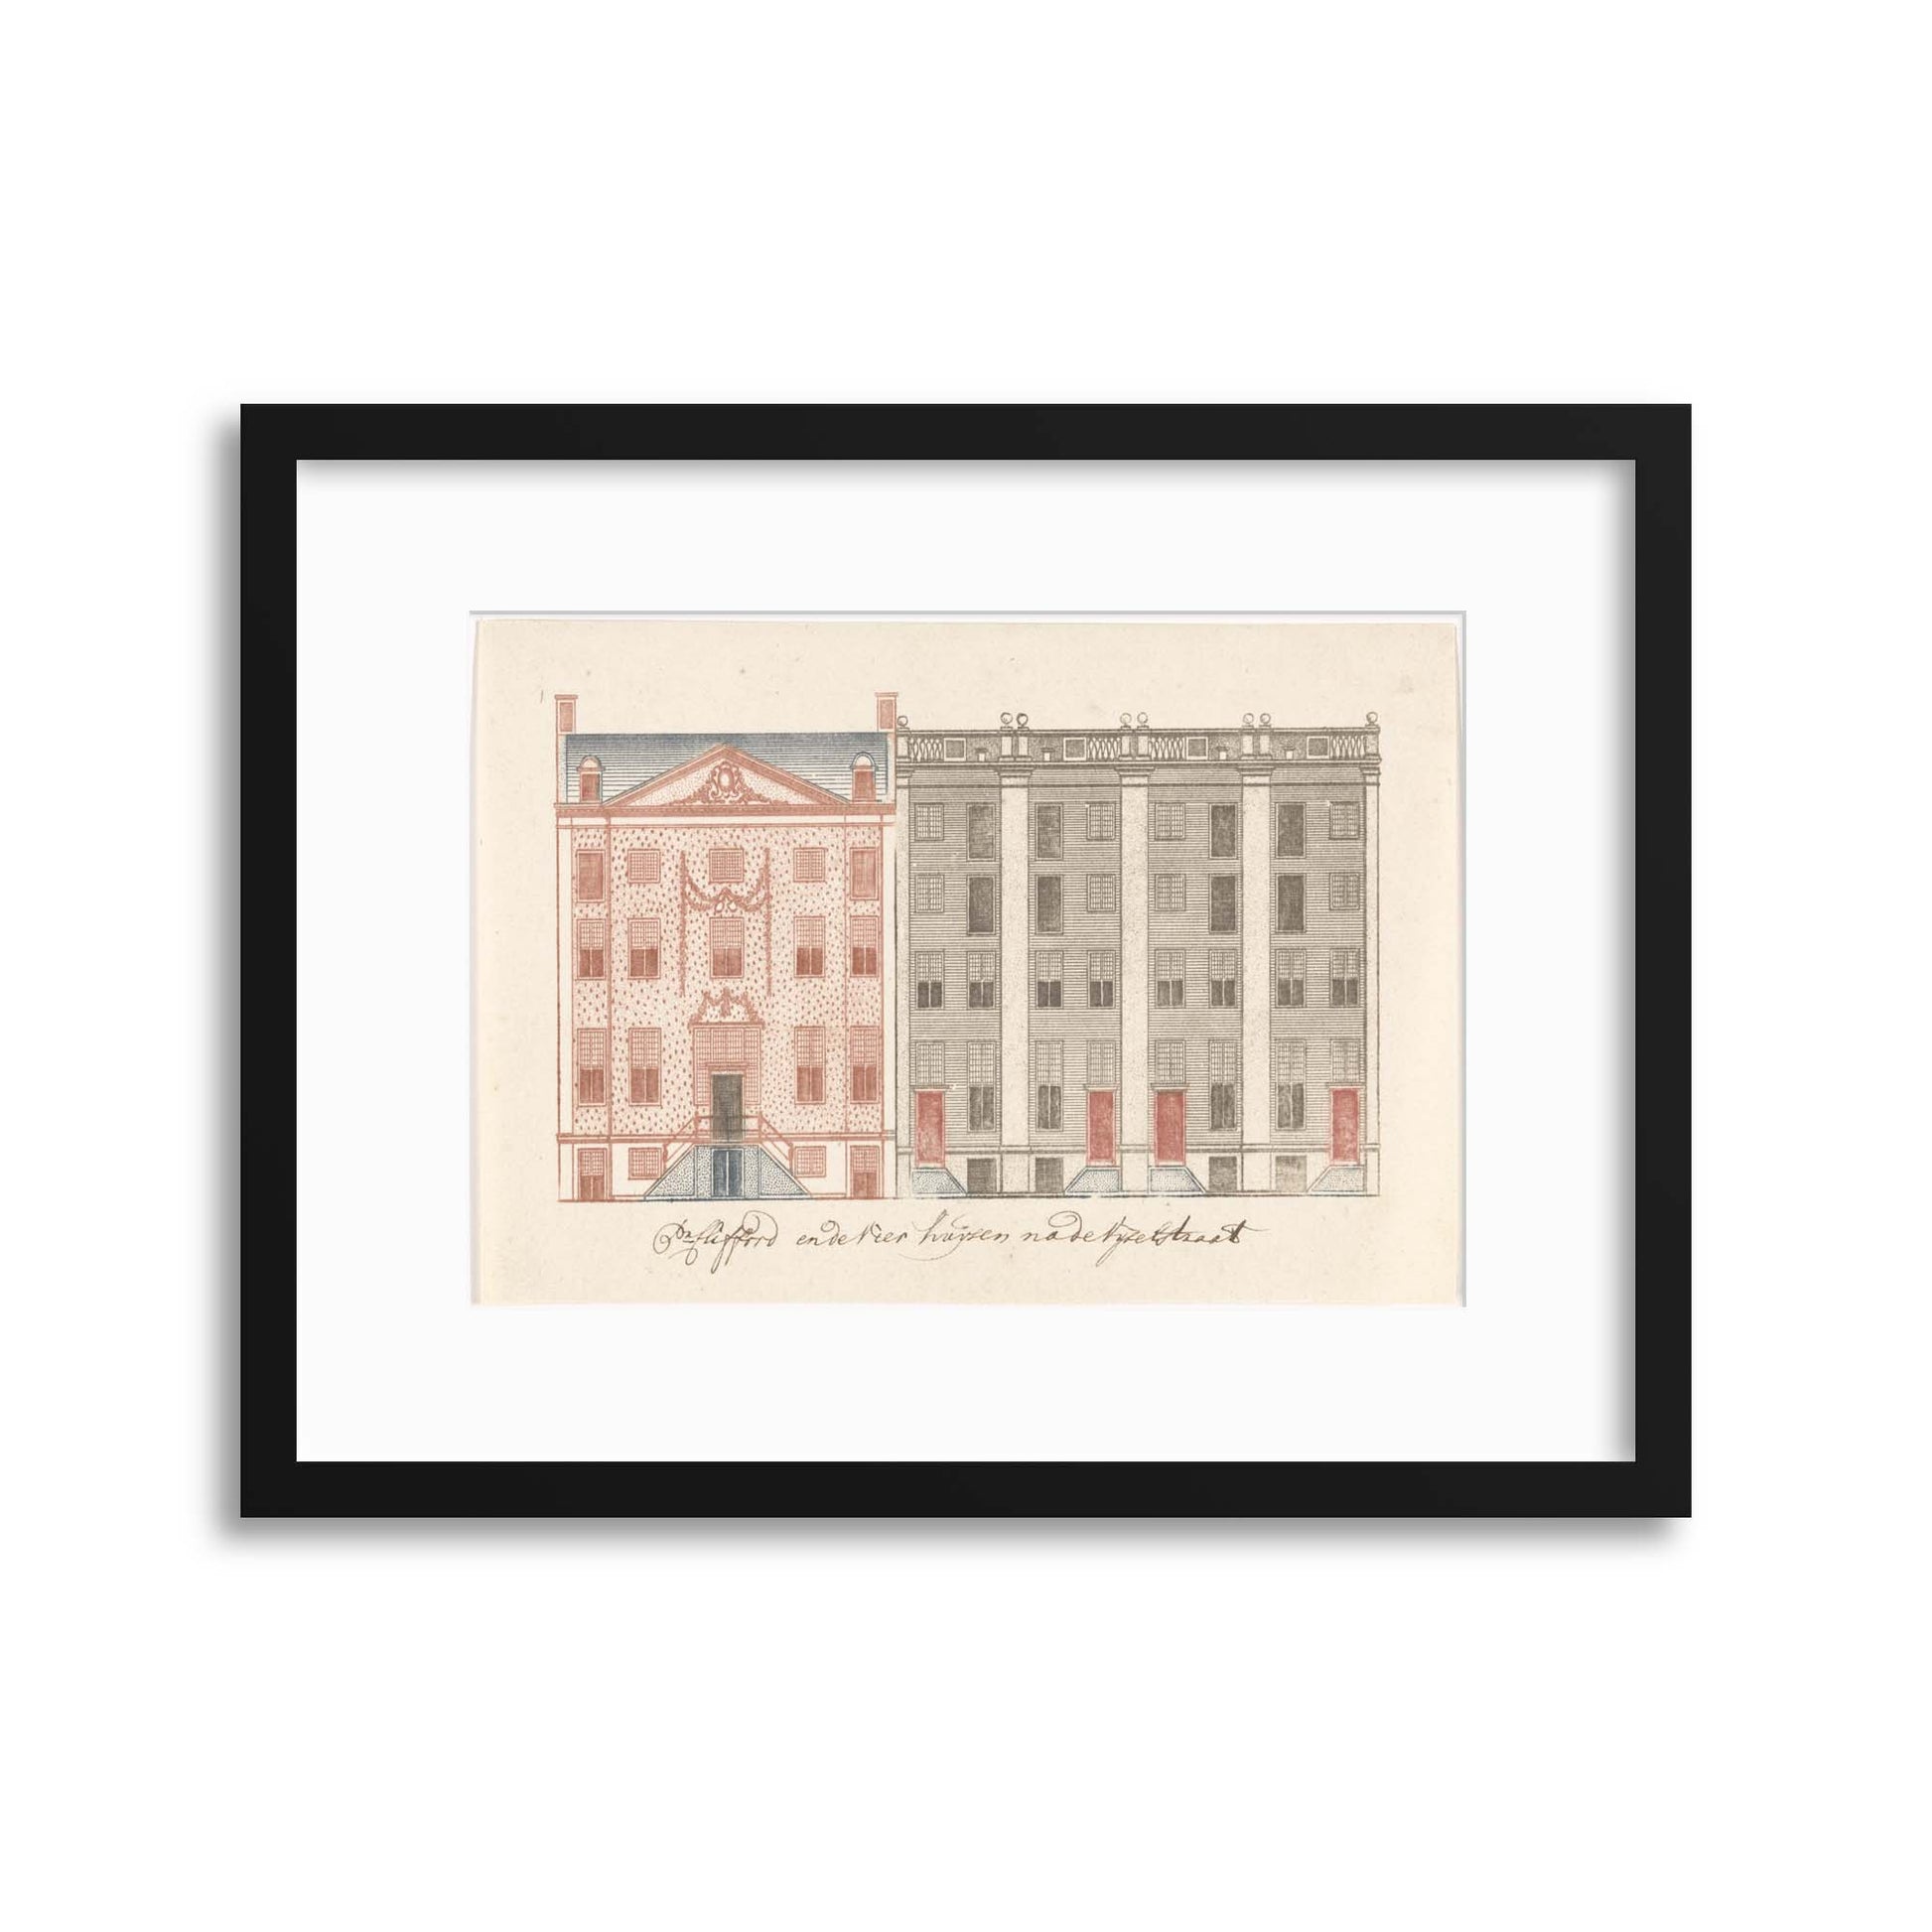 Classical Architecture, Illustrated - II Framed Print - USTAD HOME